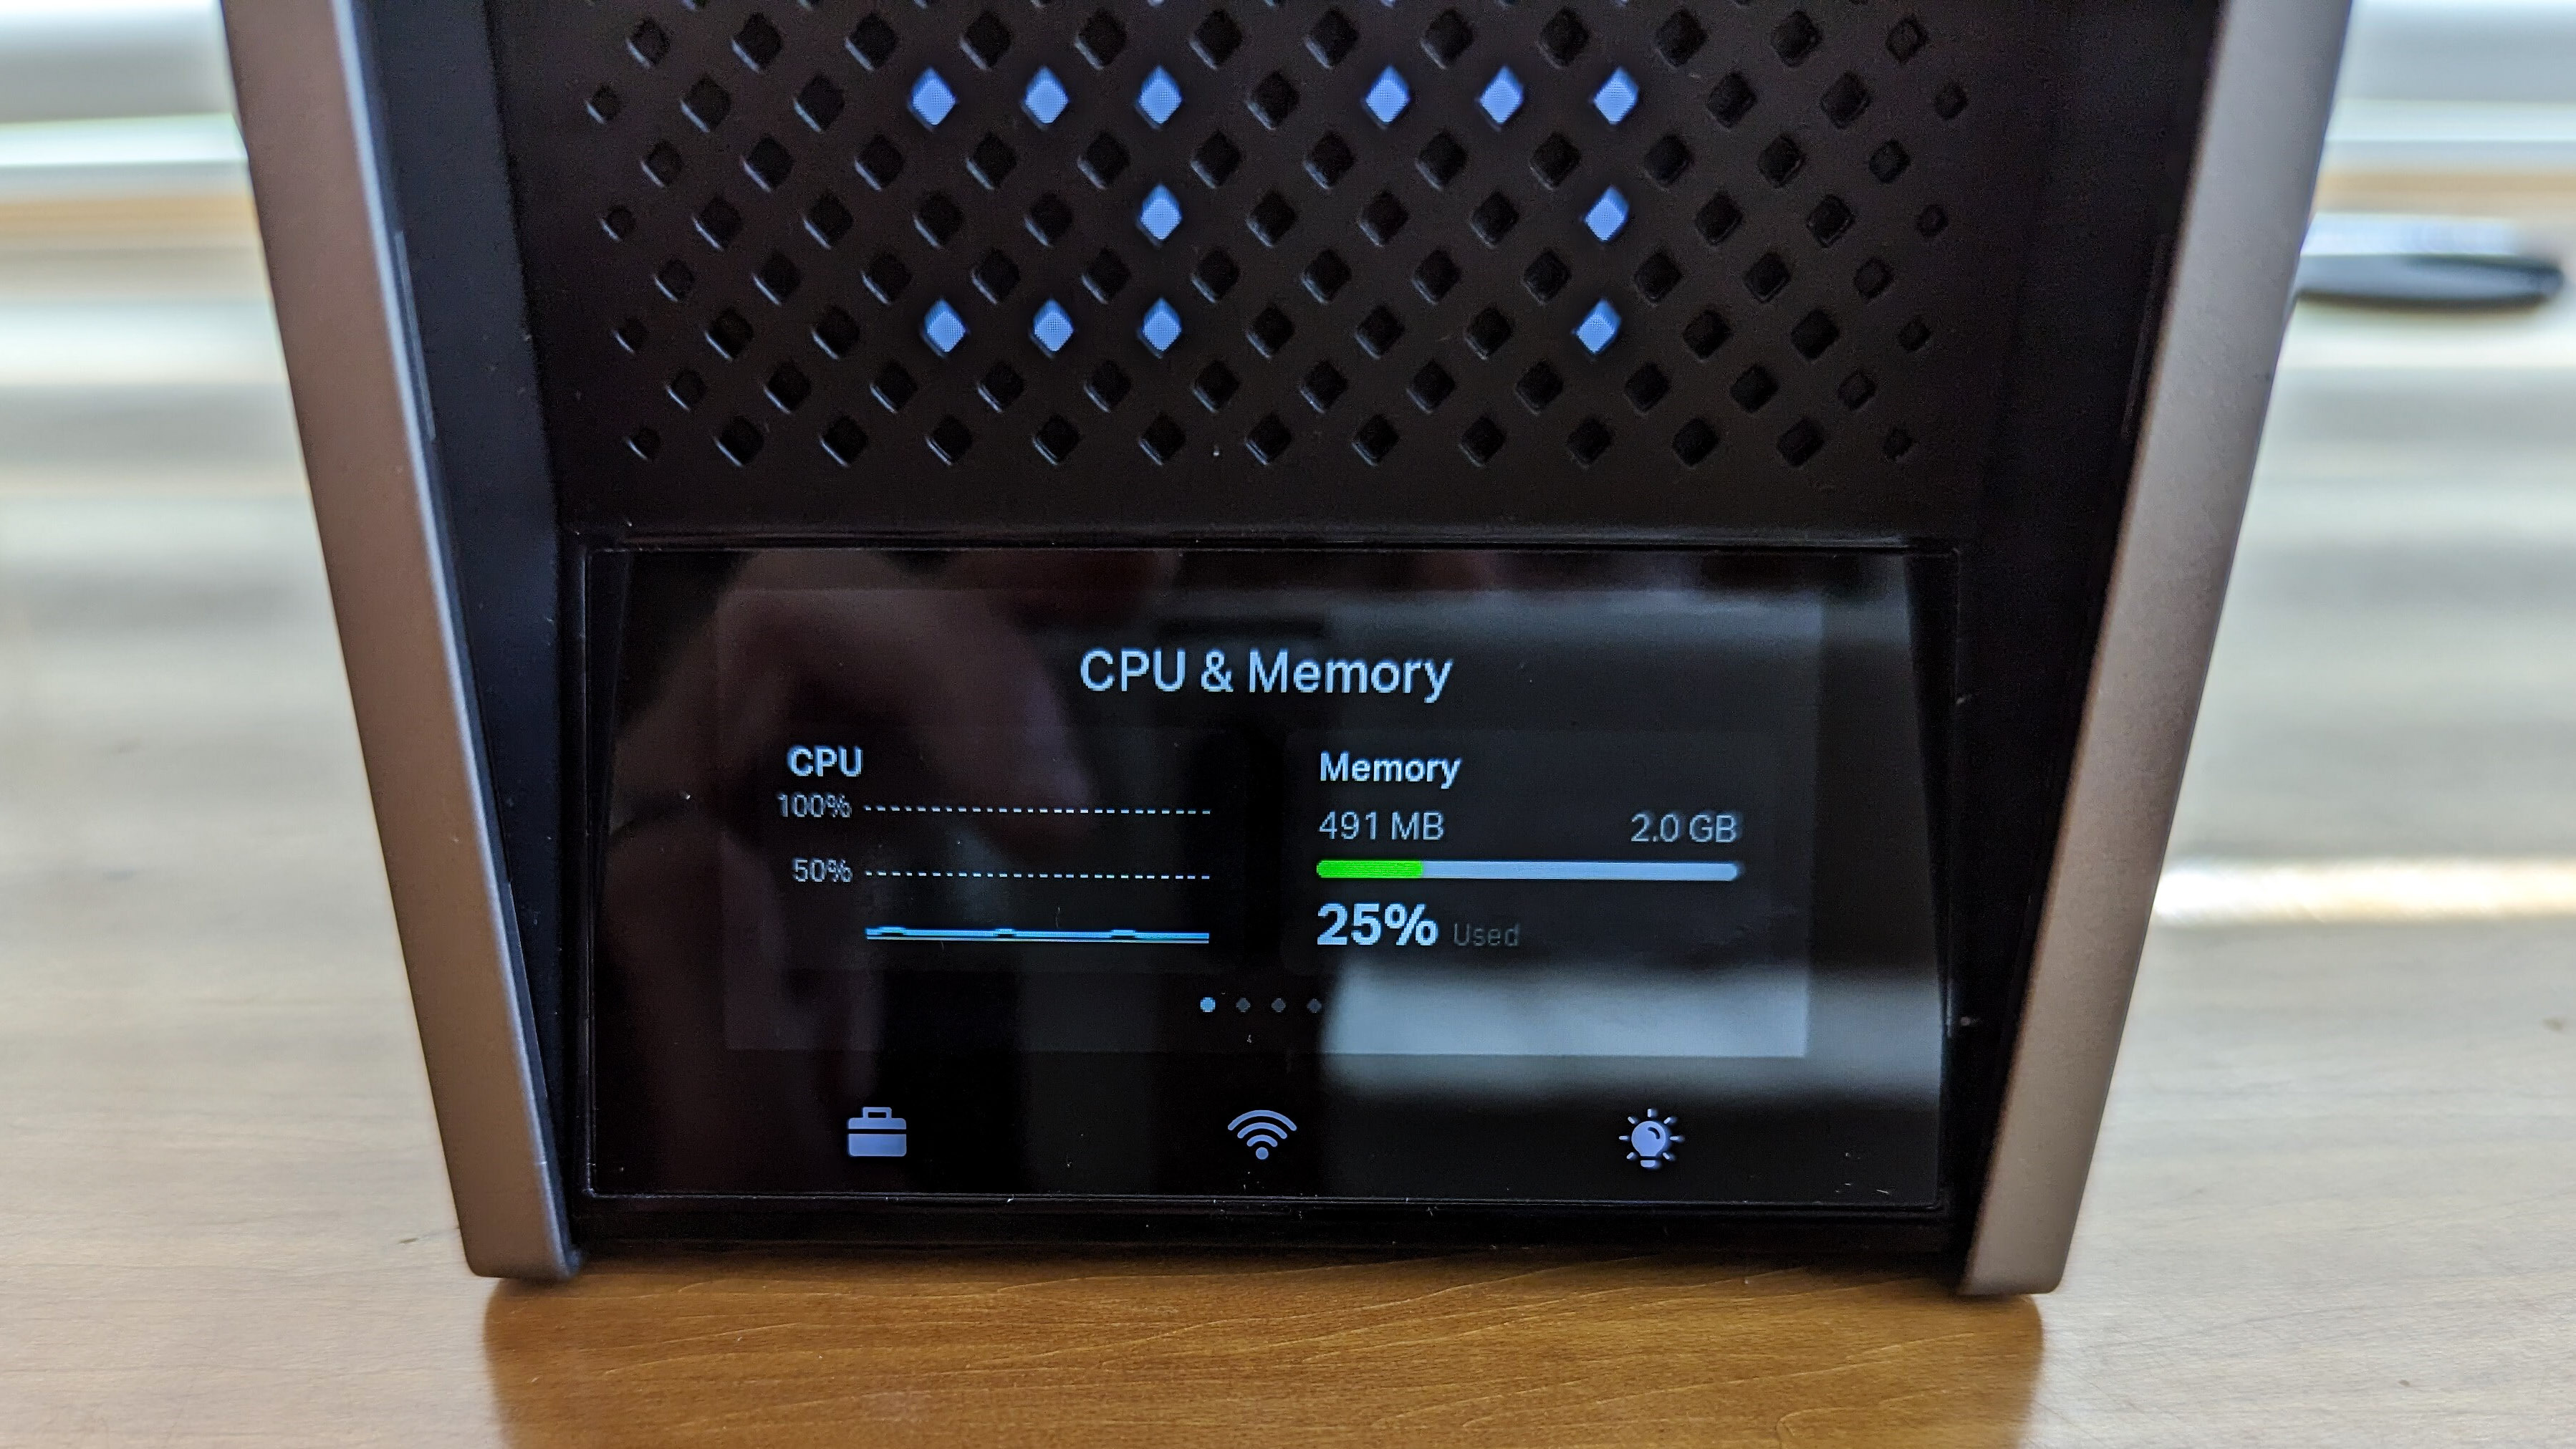 The TP-Link Archer BE900's CPU and Memory info displayed on its bottom screen